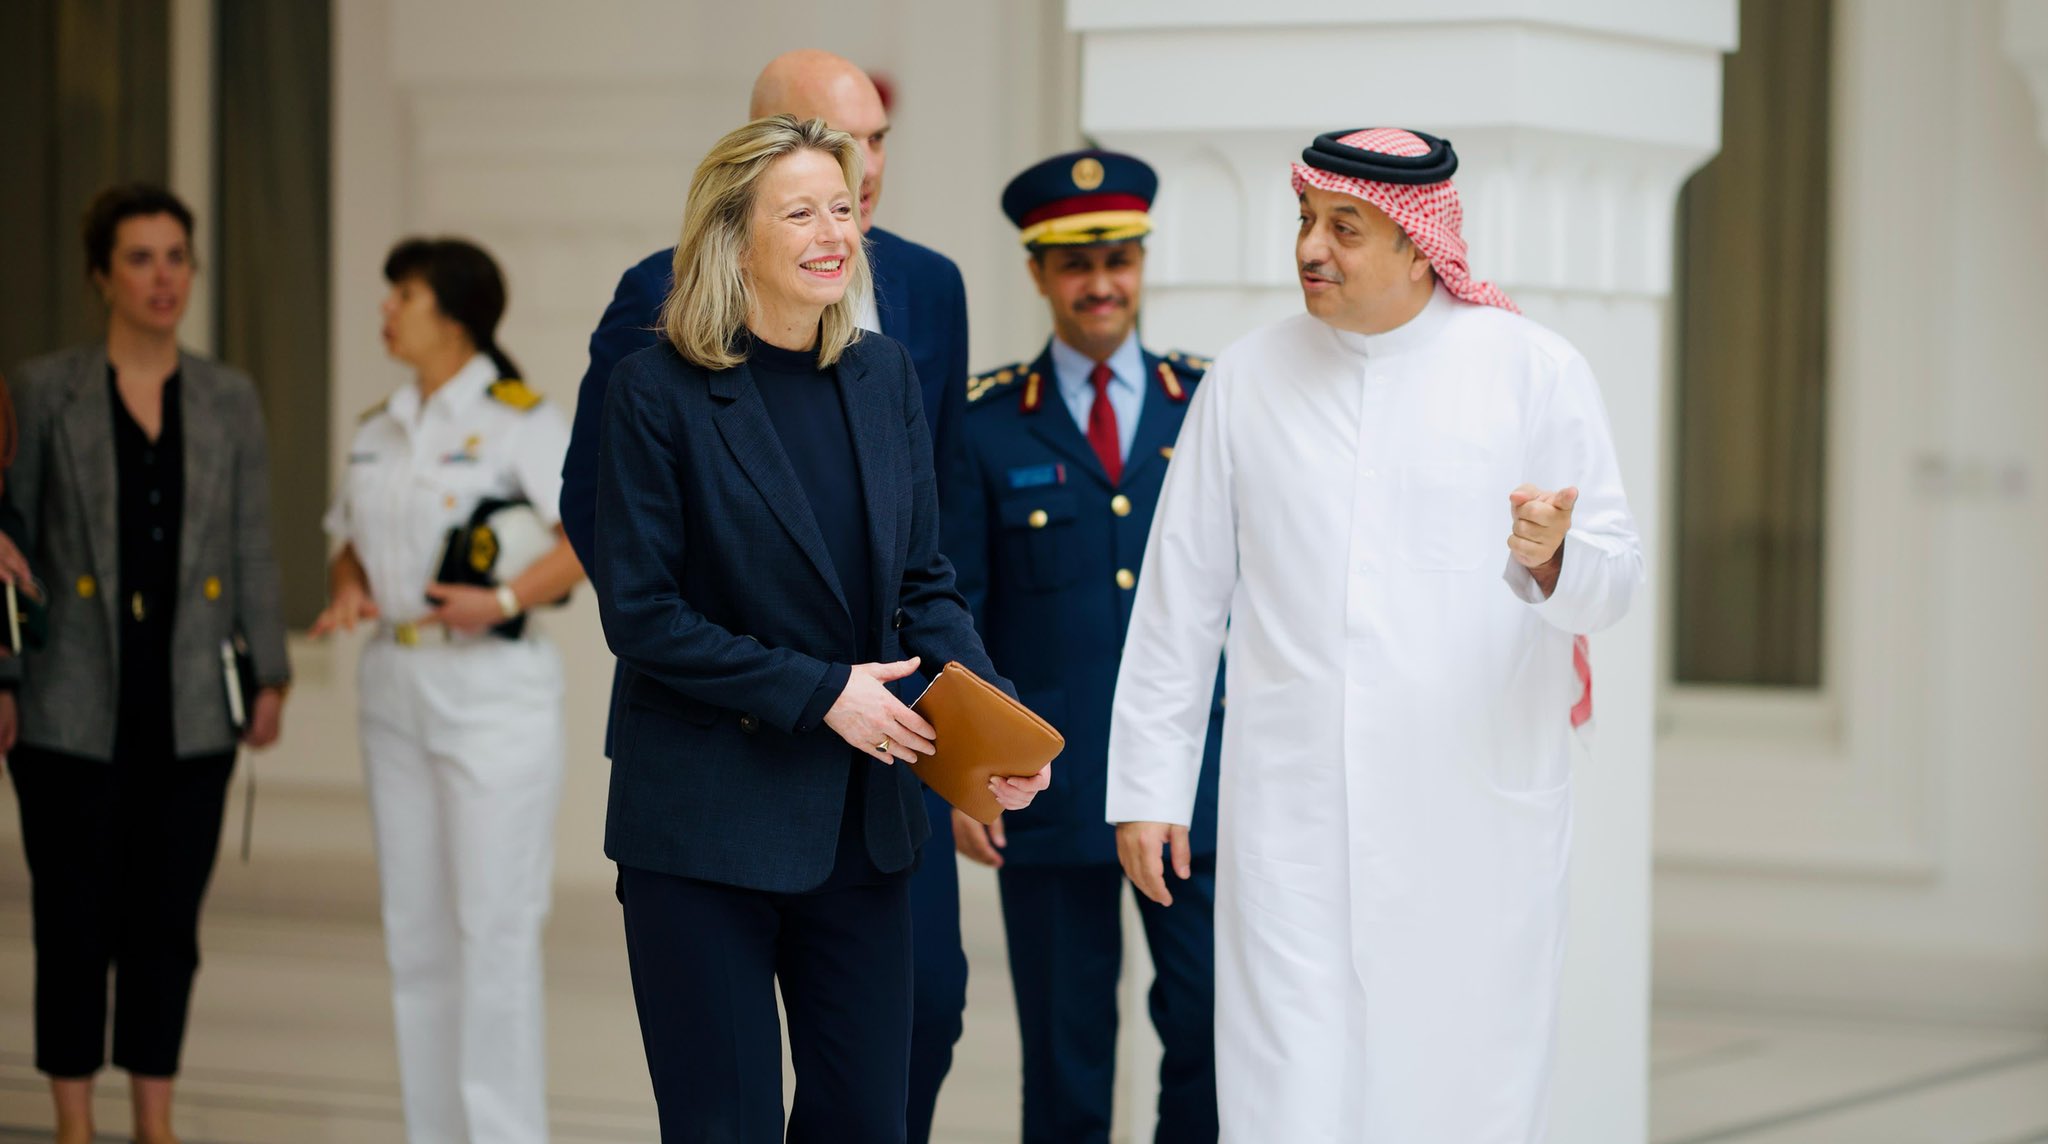 Dutch defence minister meets Qatari counterpart during official visit to Doha